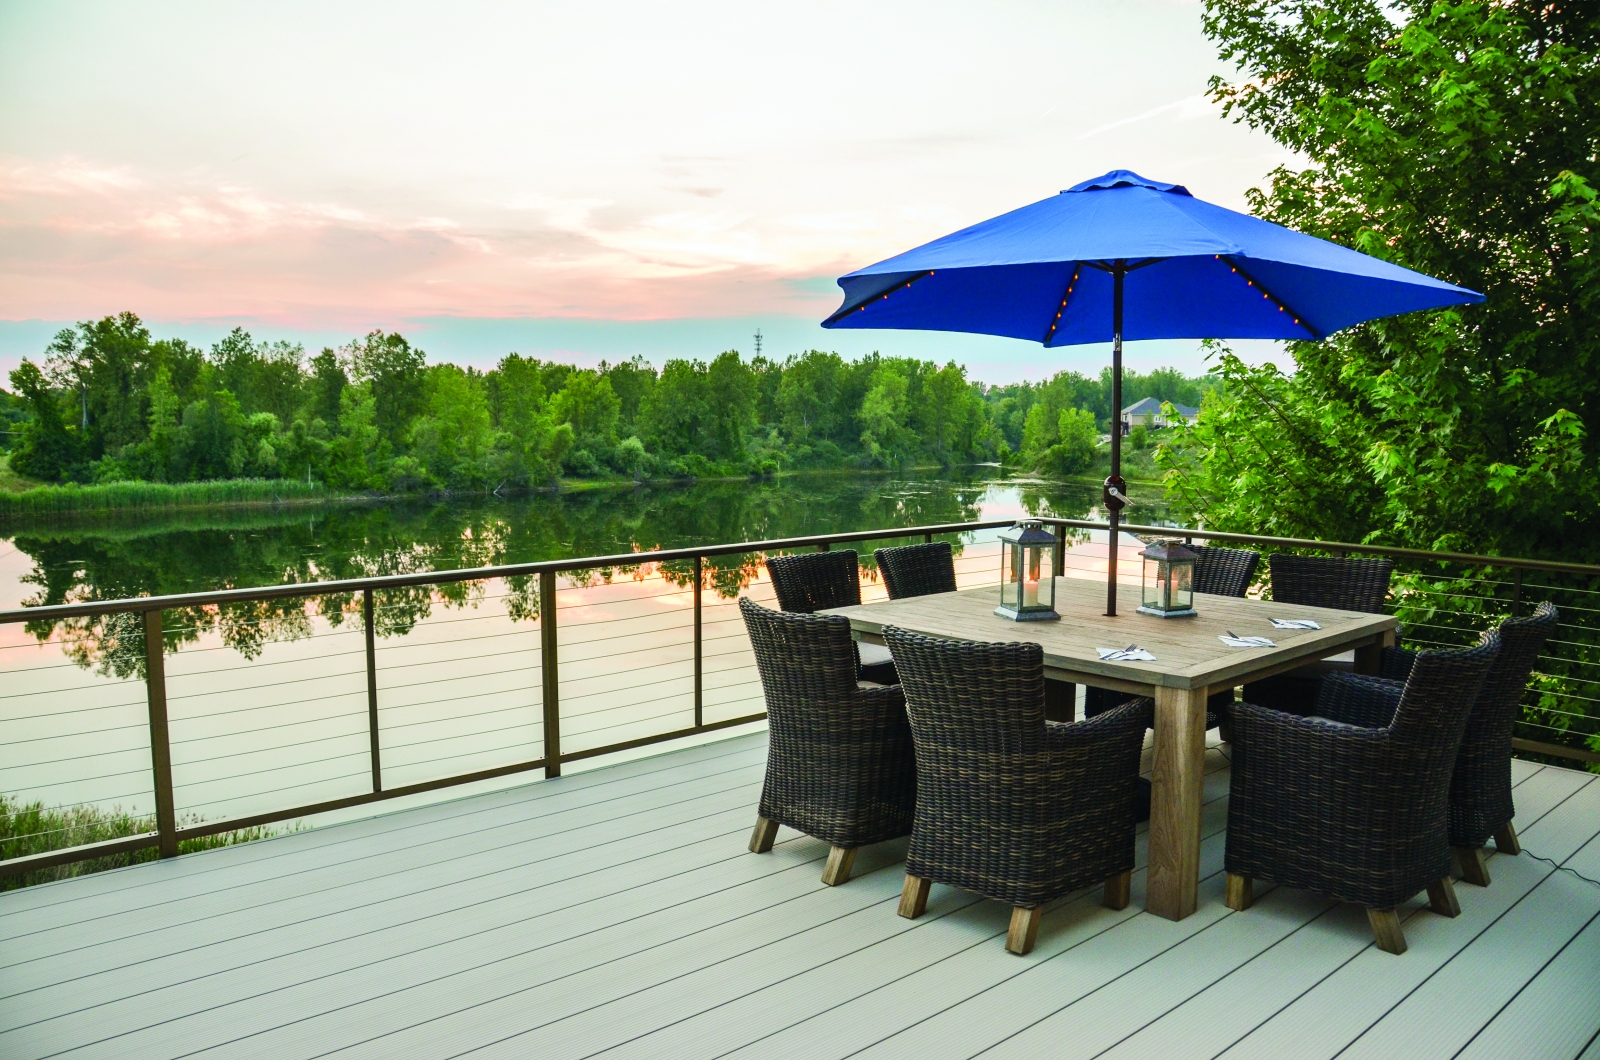 The Fortis Aluminum Decking System from Wahoo Decks